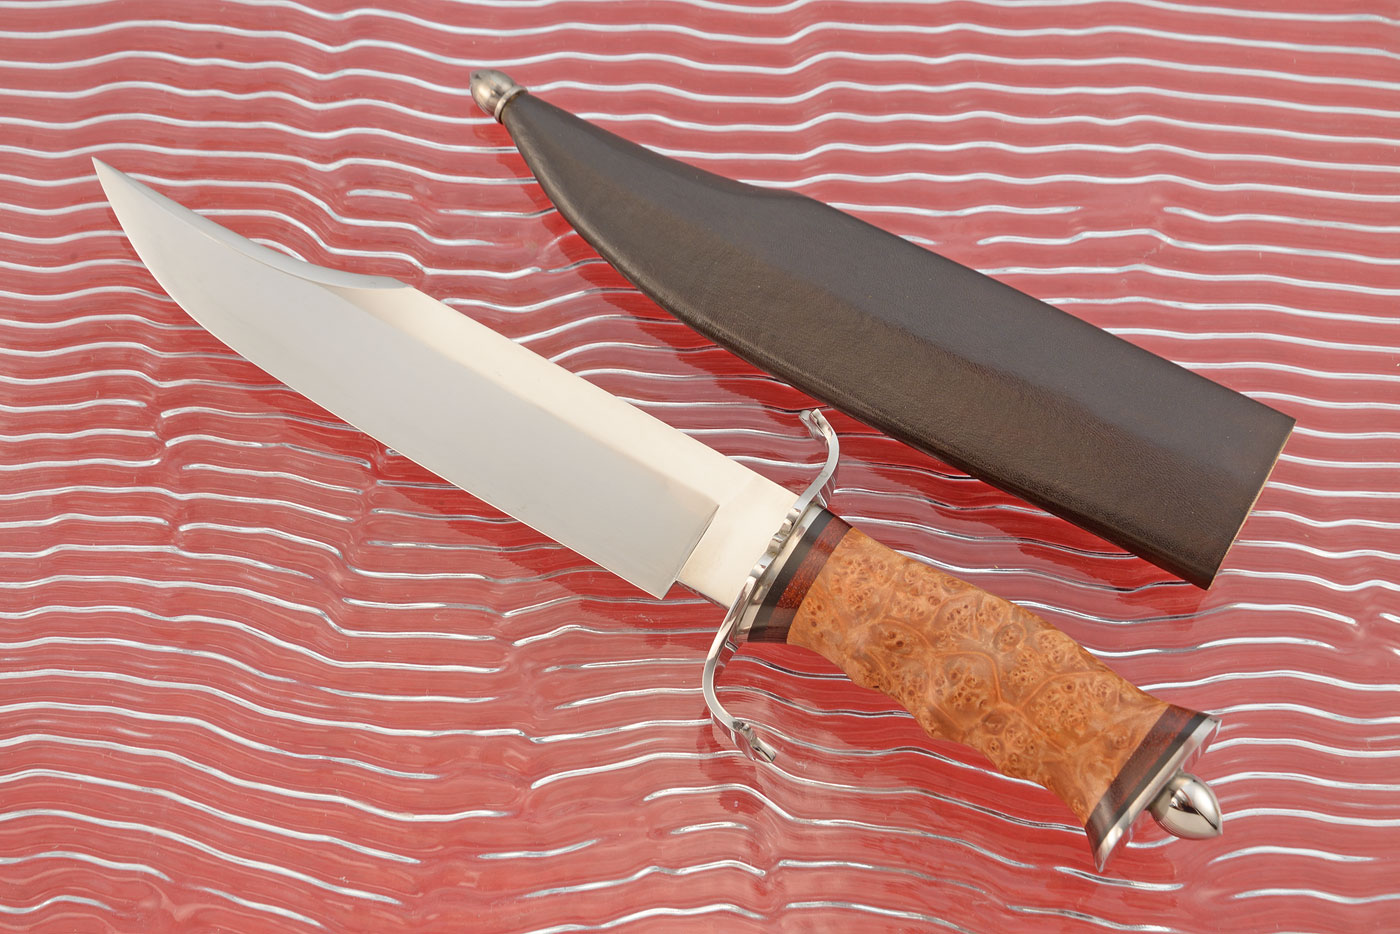 S-Guard Bowie with Maple Burl, Bloodwood, and Ebony